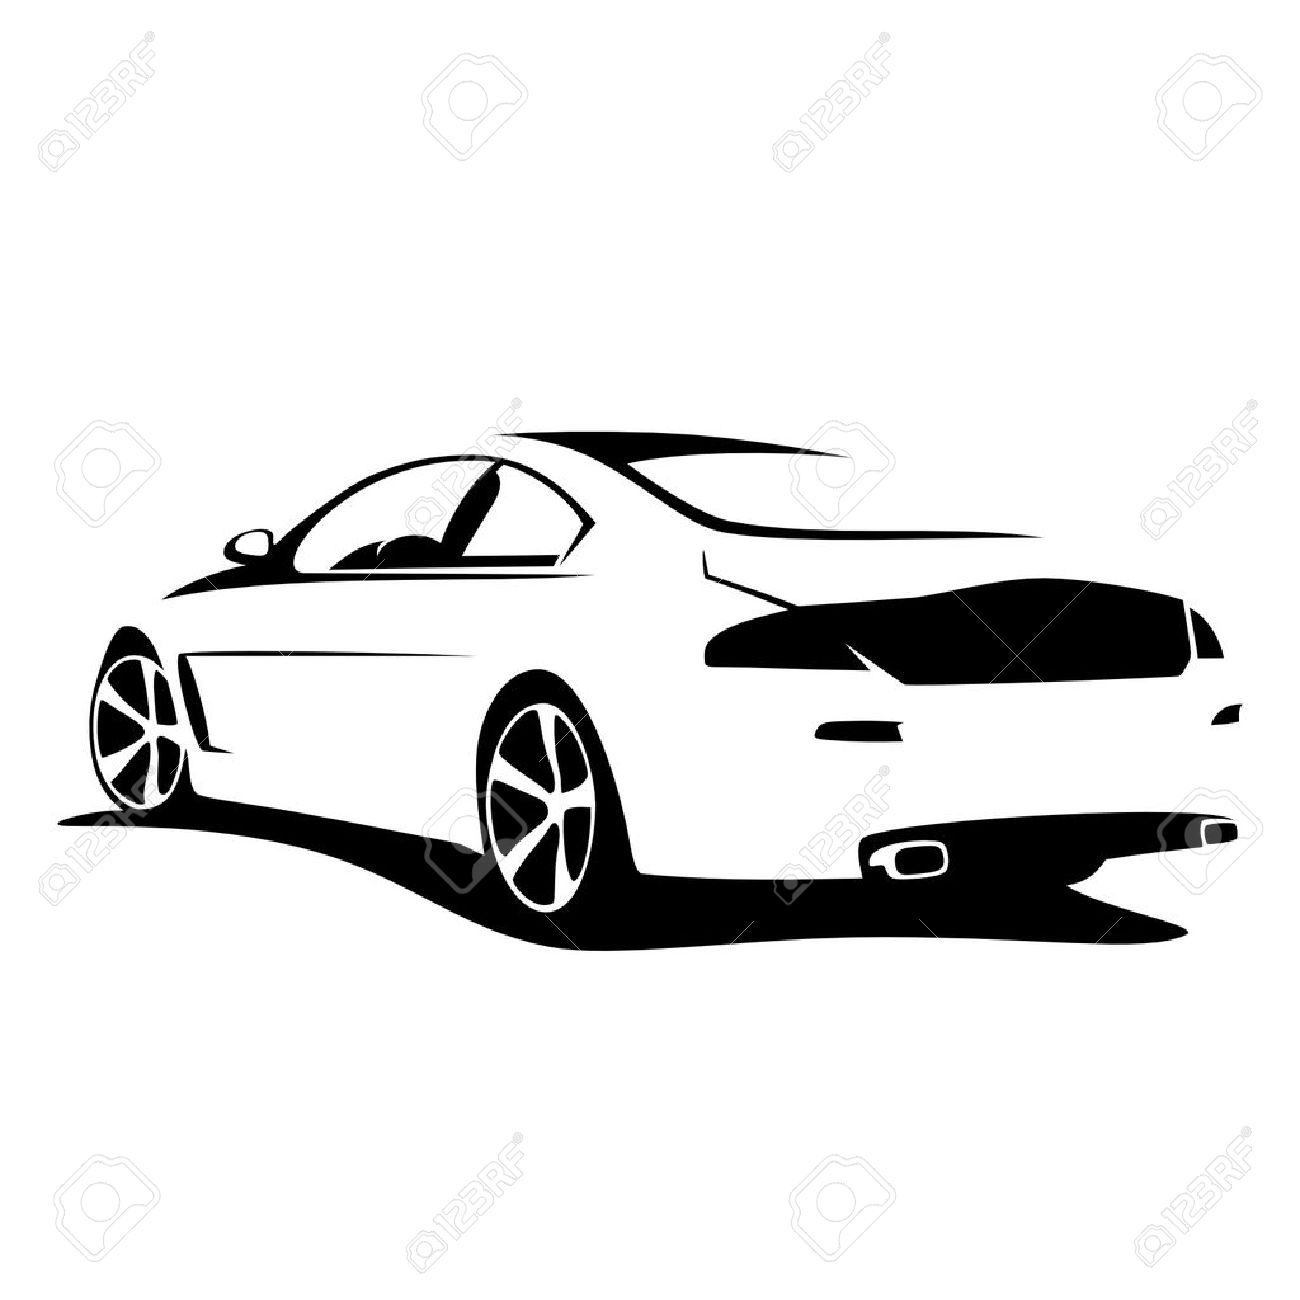 tuning car silhouette Stock Vector - 20227405